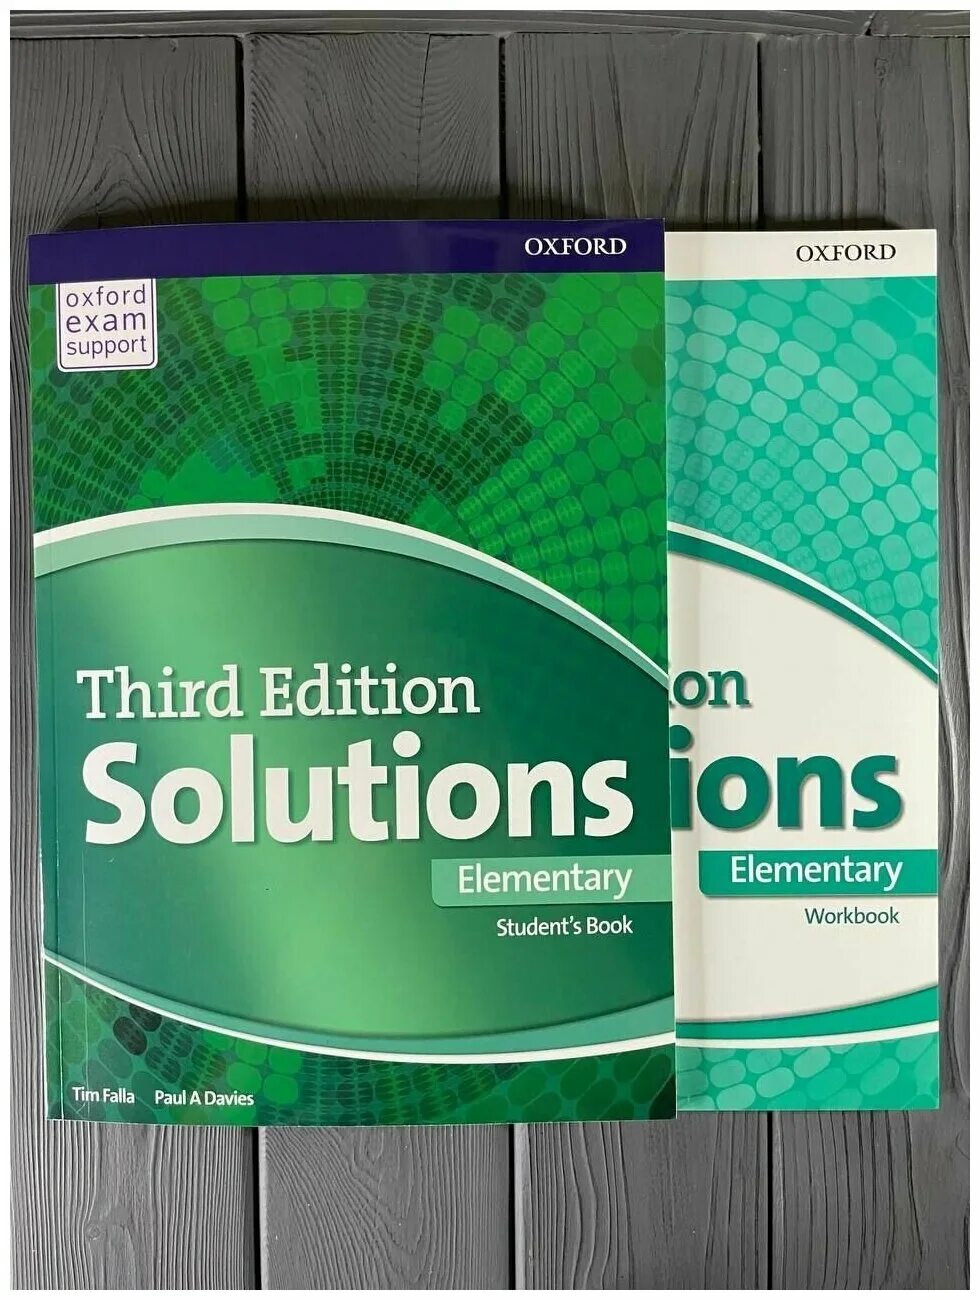 Solutions elementary students book audio. Solutions Elementary 3rd Edition. Учебник solutions Elementary 3 Edition. Oxford solutions Elementary. Solution Elementary students book 3 Edition.